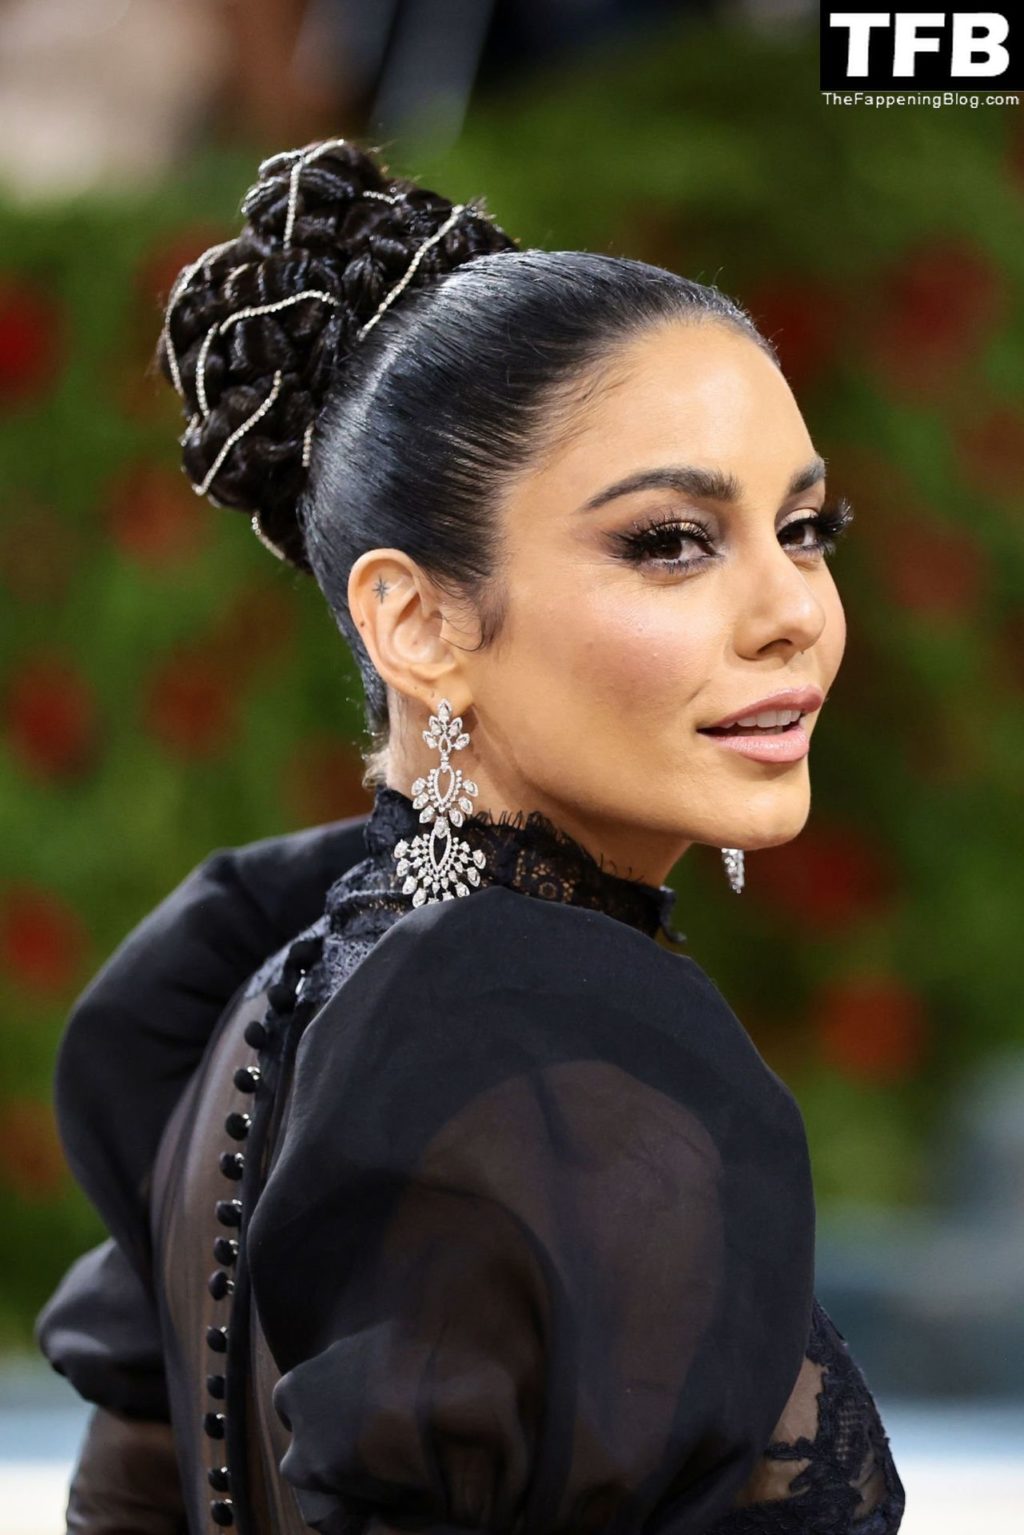 Vanessa Hudgens Sexy The Fappening Blog 48 1024x1535 - Vanessa Hudgens Looks Stunning in a See-Through Dress at The 2022 Met Gala in NYC (99 Photos)